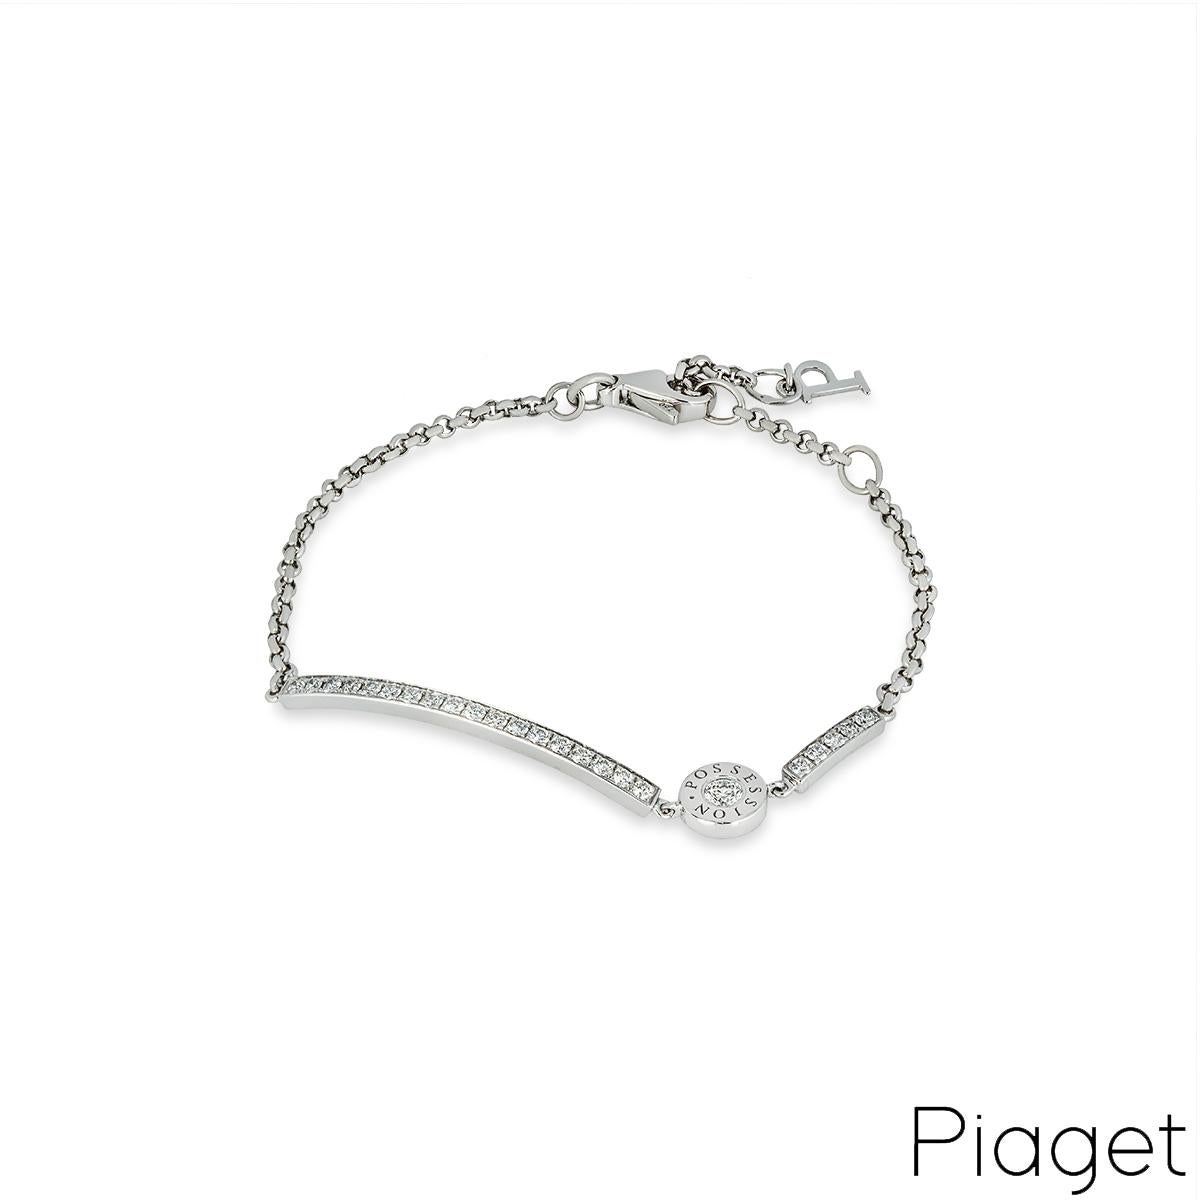 A delicate 18k white gold diamond bracelet by Piaget from the Possession collection. The bracelet comprises of a curved bar set with 18 round brilliant cut diamonds and a second bar set with 5 round brilliant cut diamonds. In between the two is a